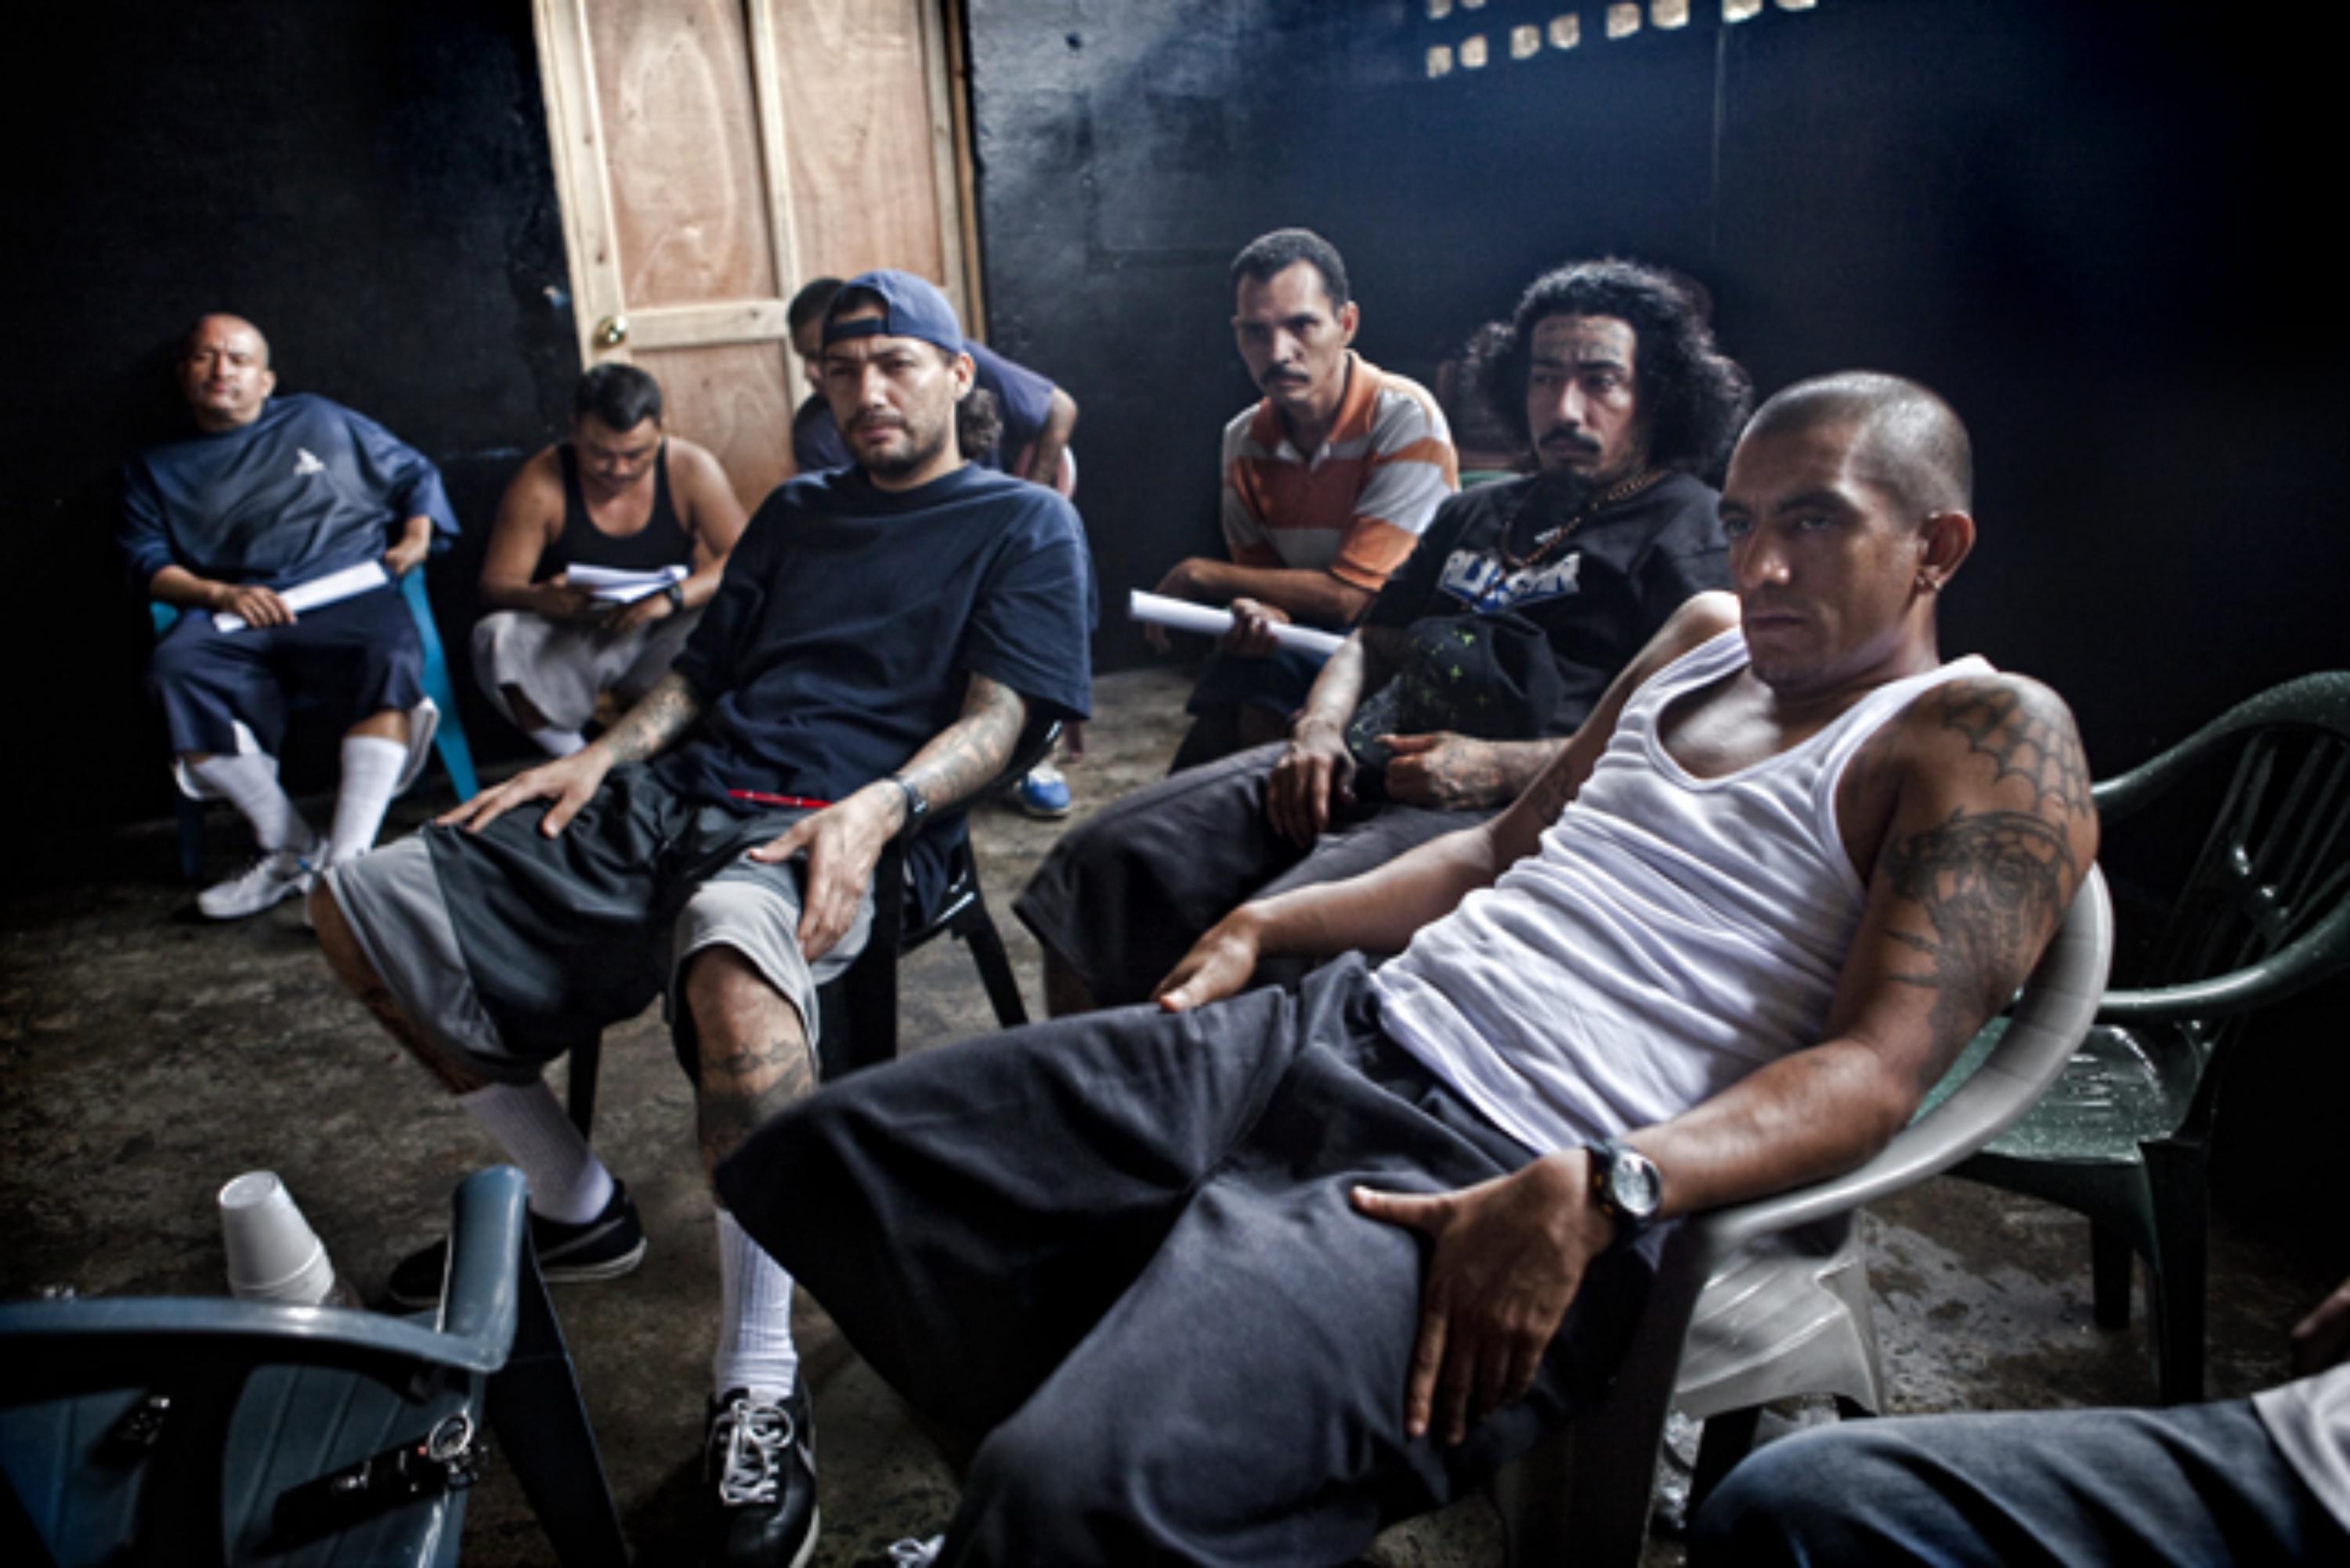 The Ranfla Nacional of the Mara Salvatrucha during one of the interviews they granted to El Faro in 2012. At the back of the group, Chino listens into the conversation before interrupting. Photo Pau Coll